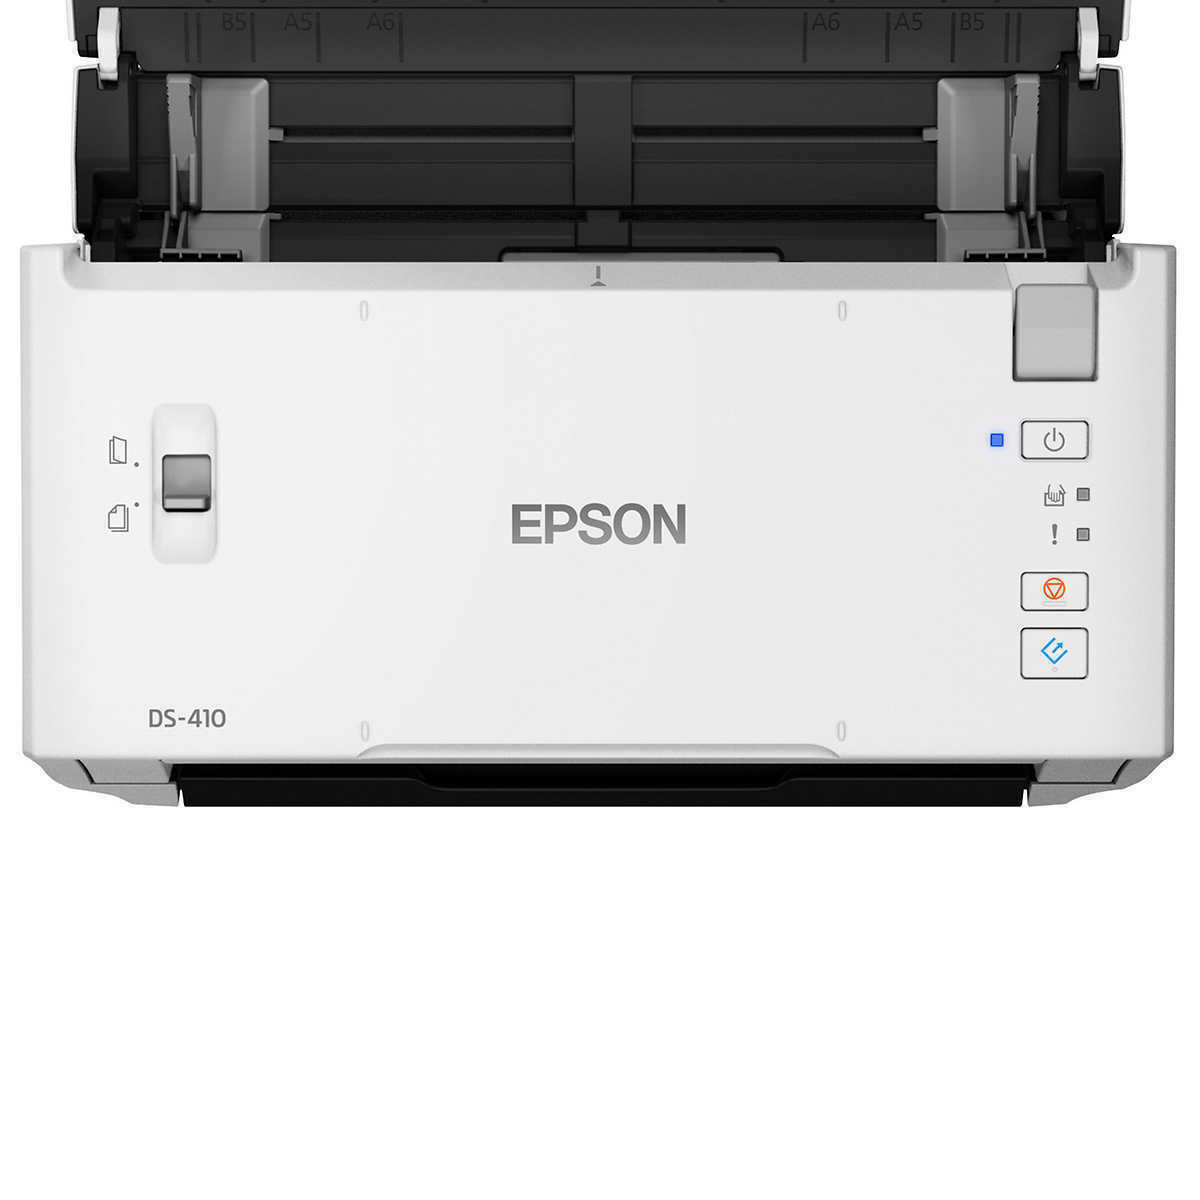 Scanner epson 410 ds document affordable compatibility speed office scanners